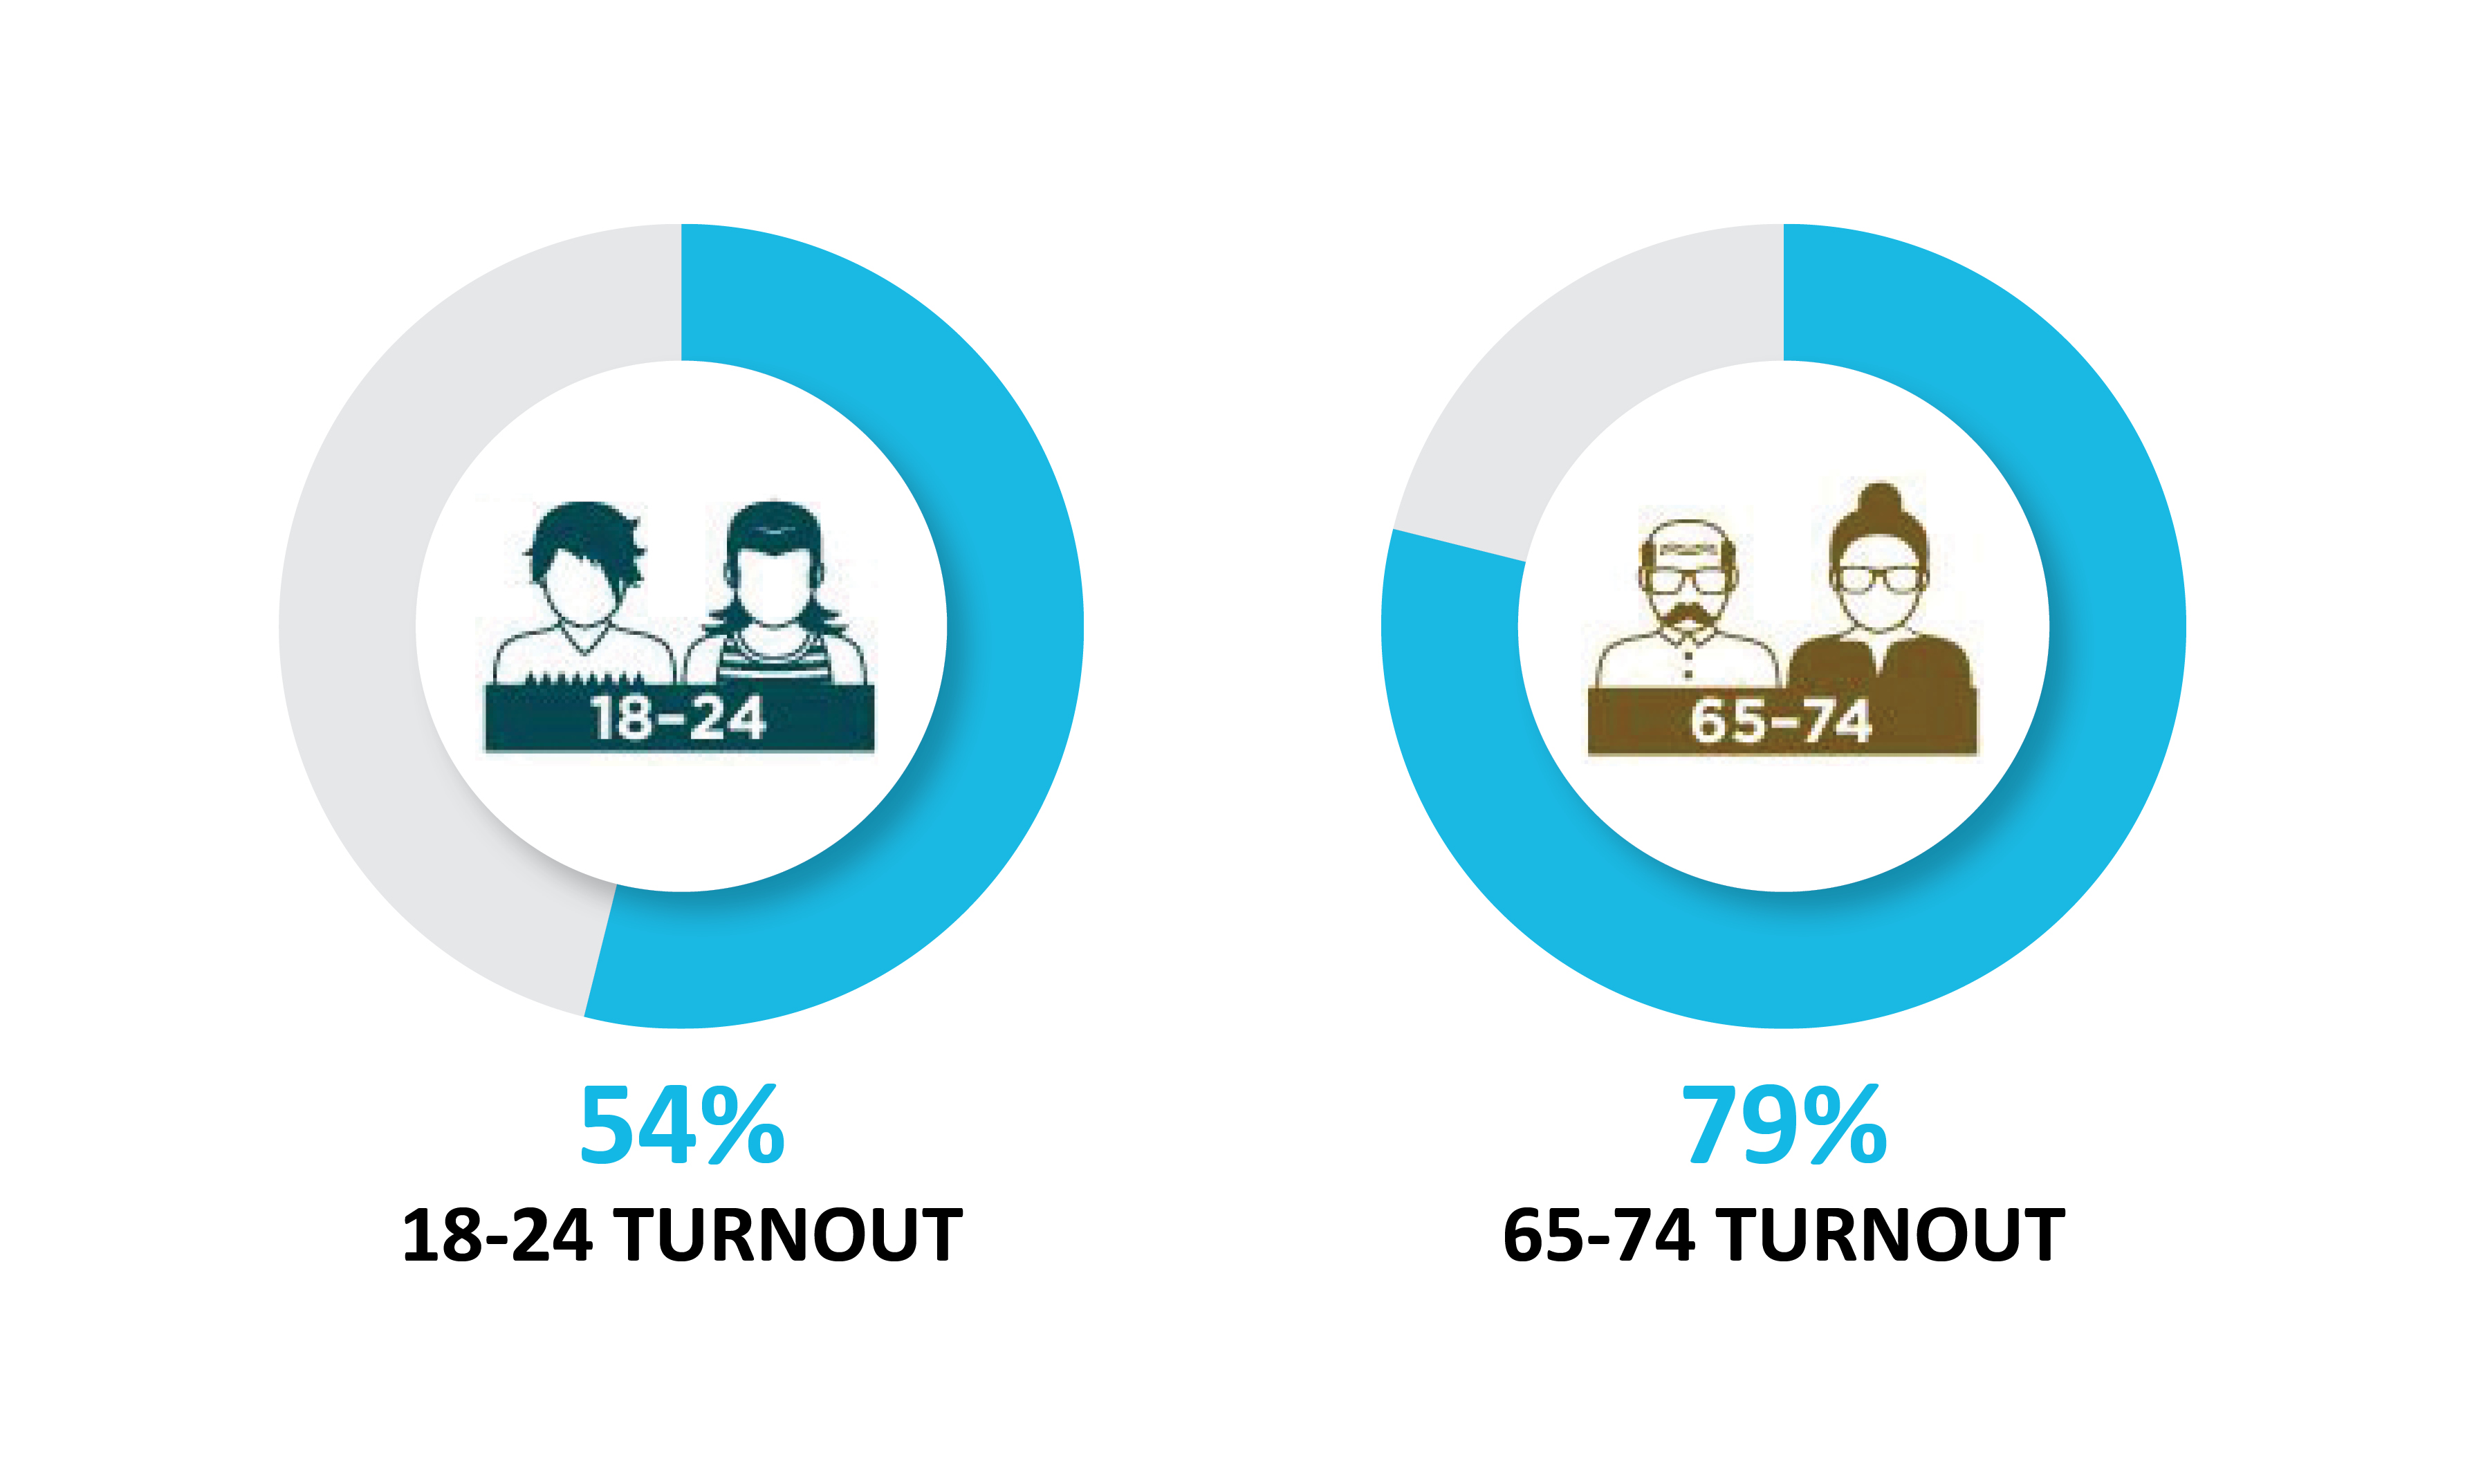 A infographic comparing turnout in two age groups. Turnout in the 18 to 24 age group is 54%. Turnout in the 65 to 74 age group is 79%.